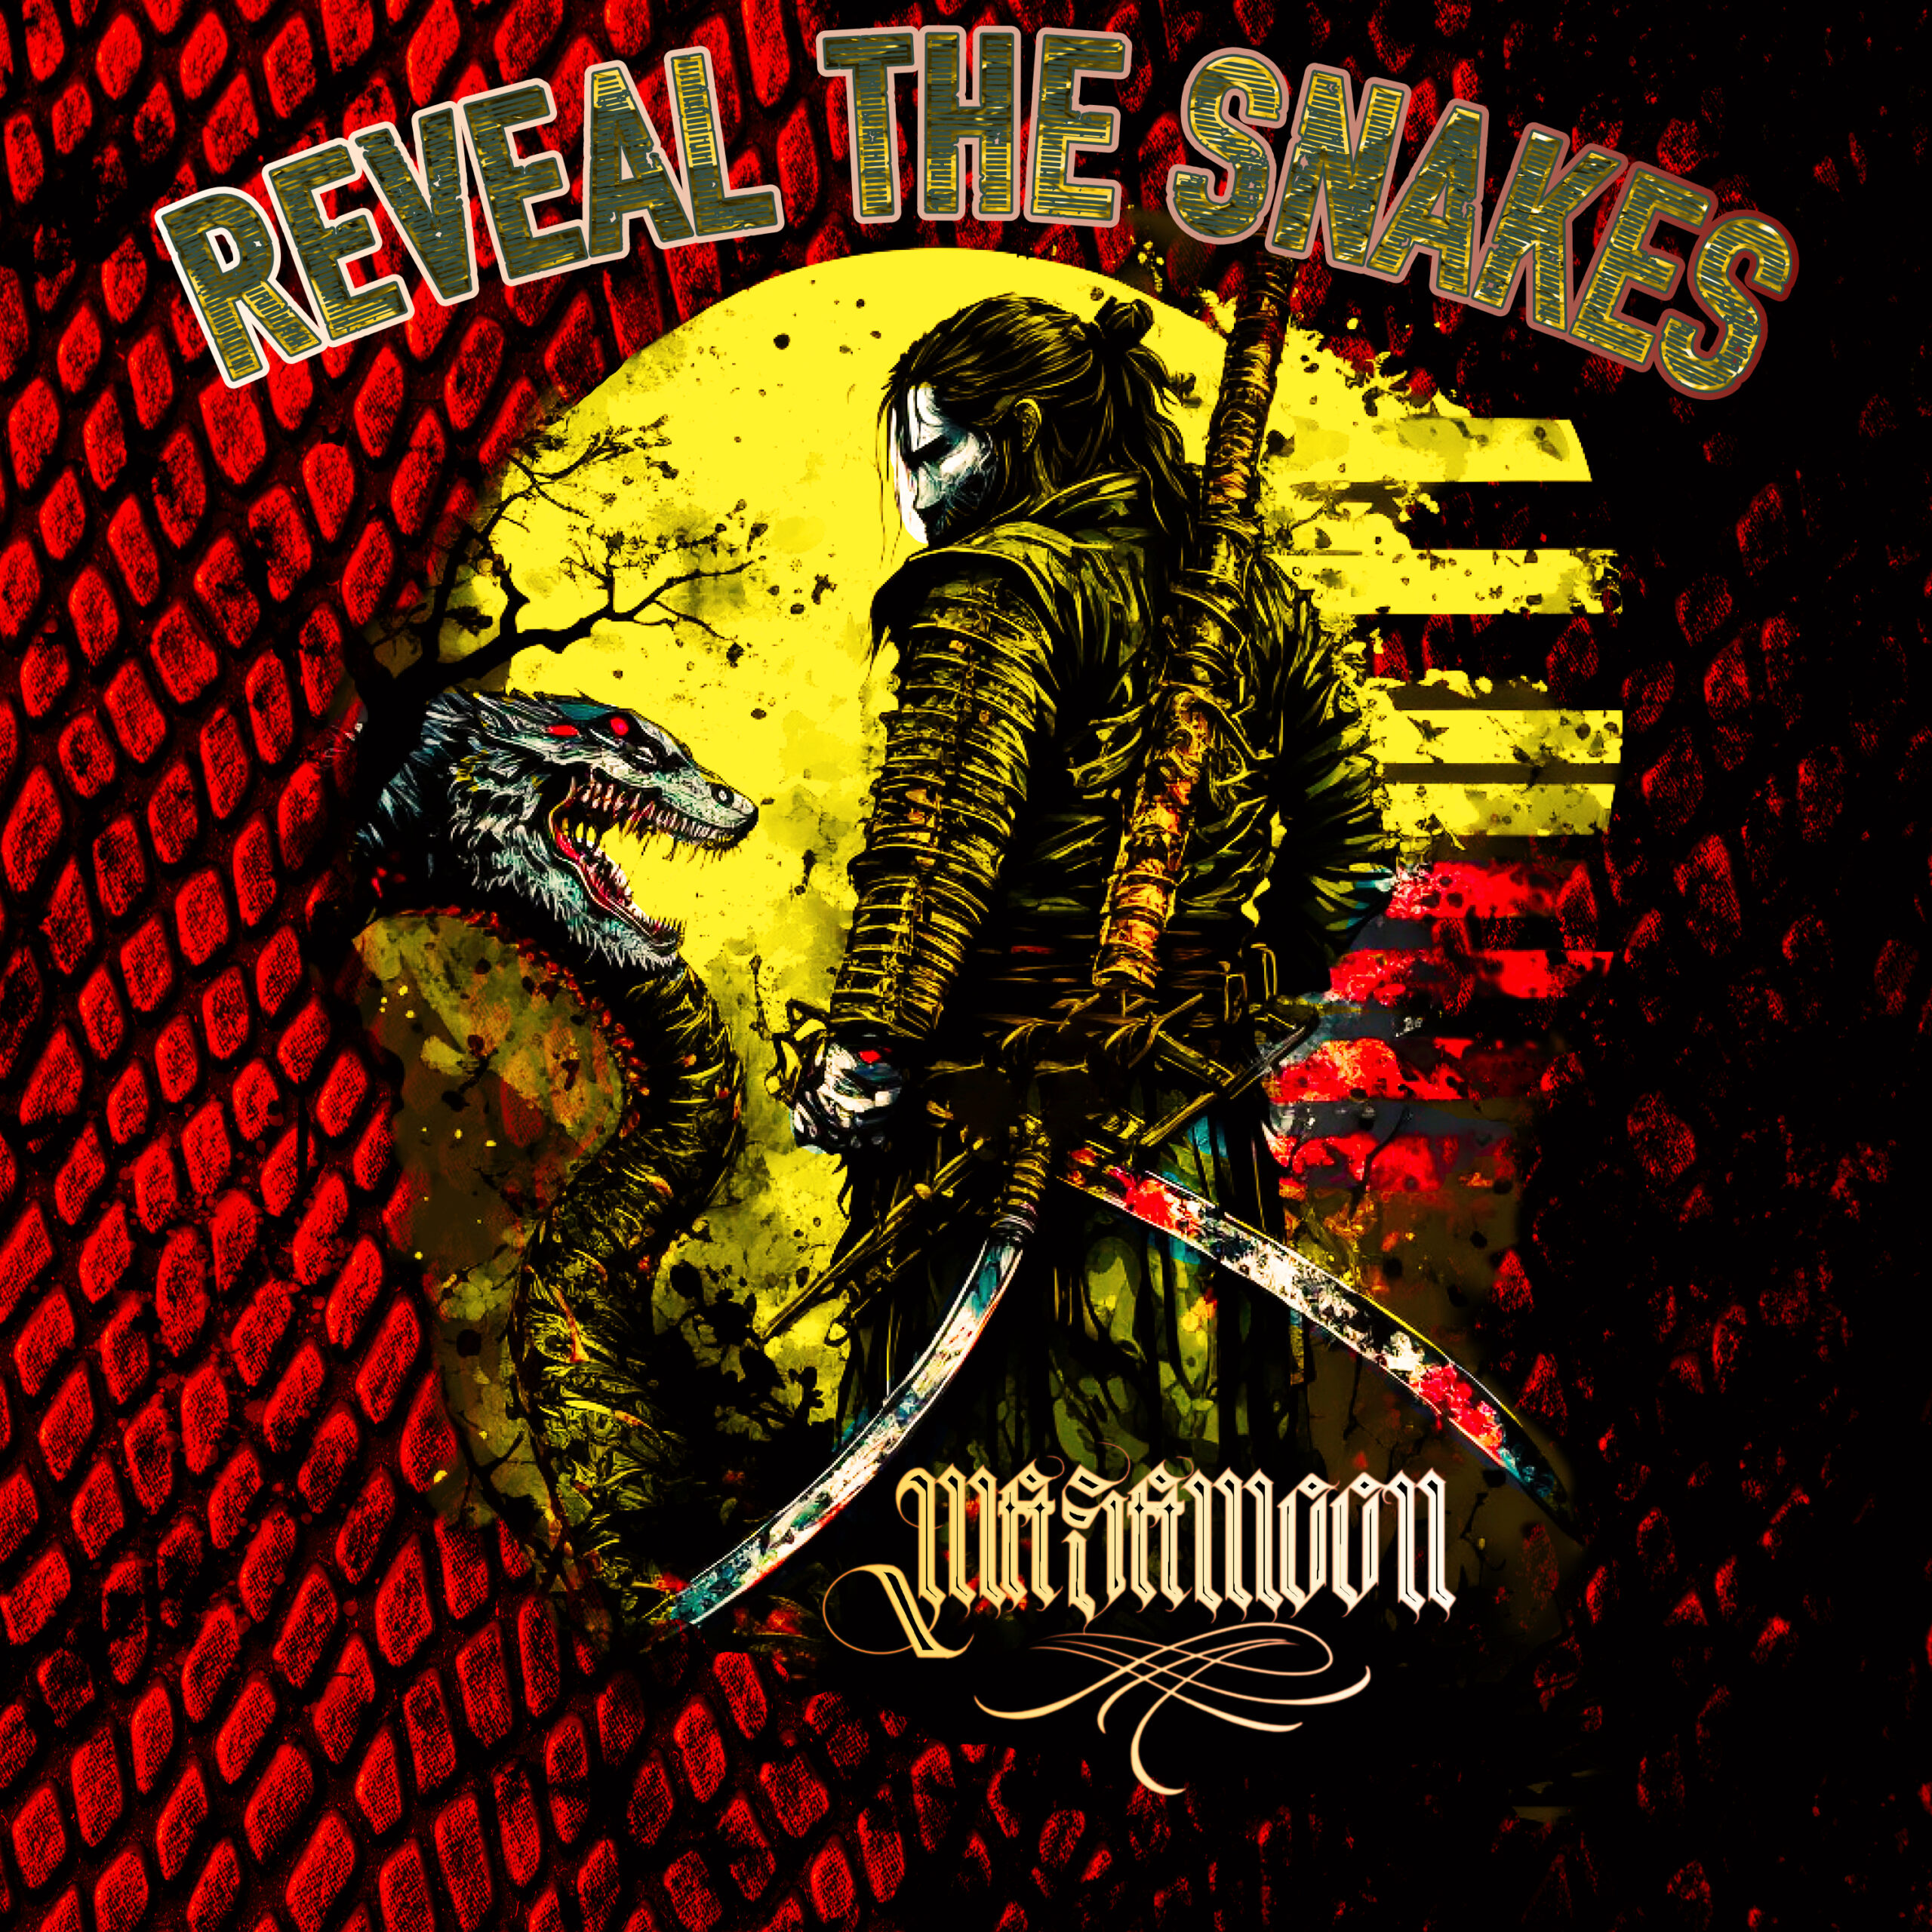 Masamoon – Reveal The Snakes (Single + Music Video)